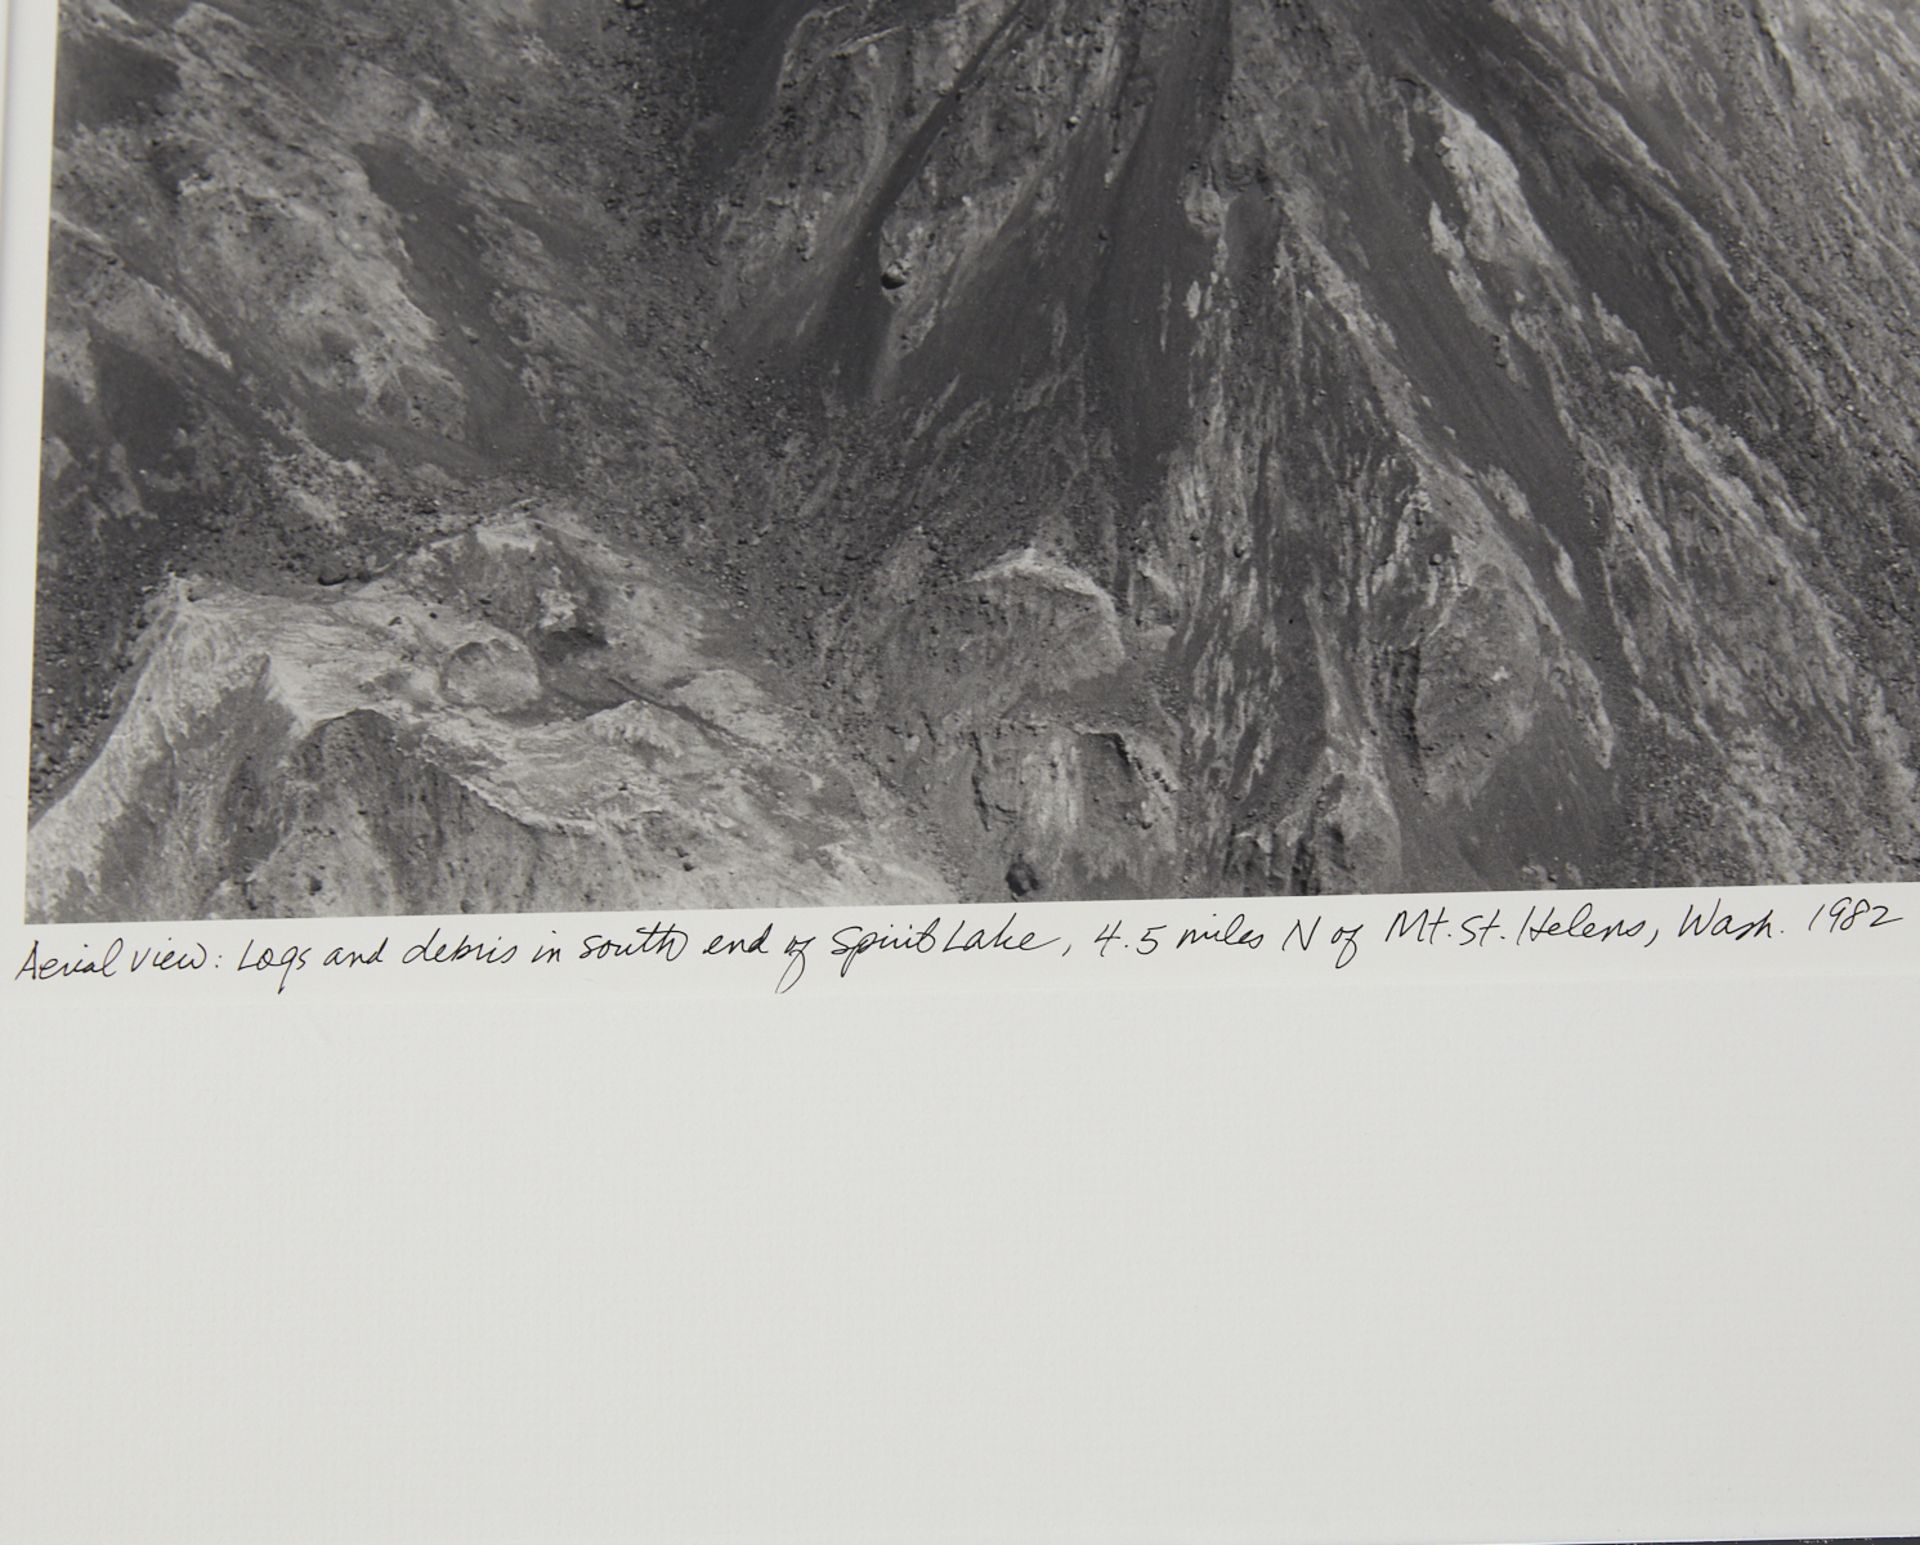 Frank Gohlke "Aerial View: Logs and Debris" Photograph - Image 3 of 3